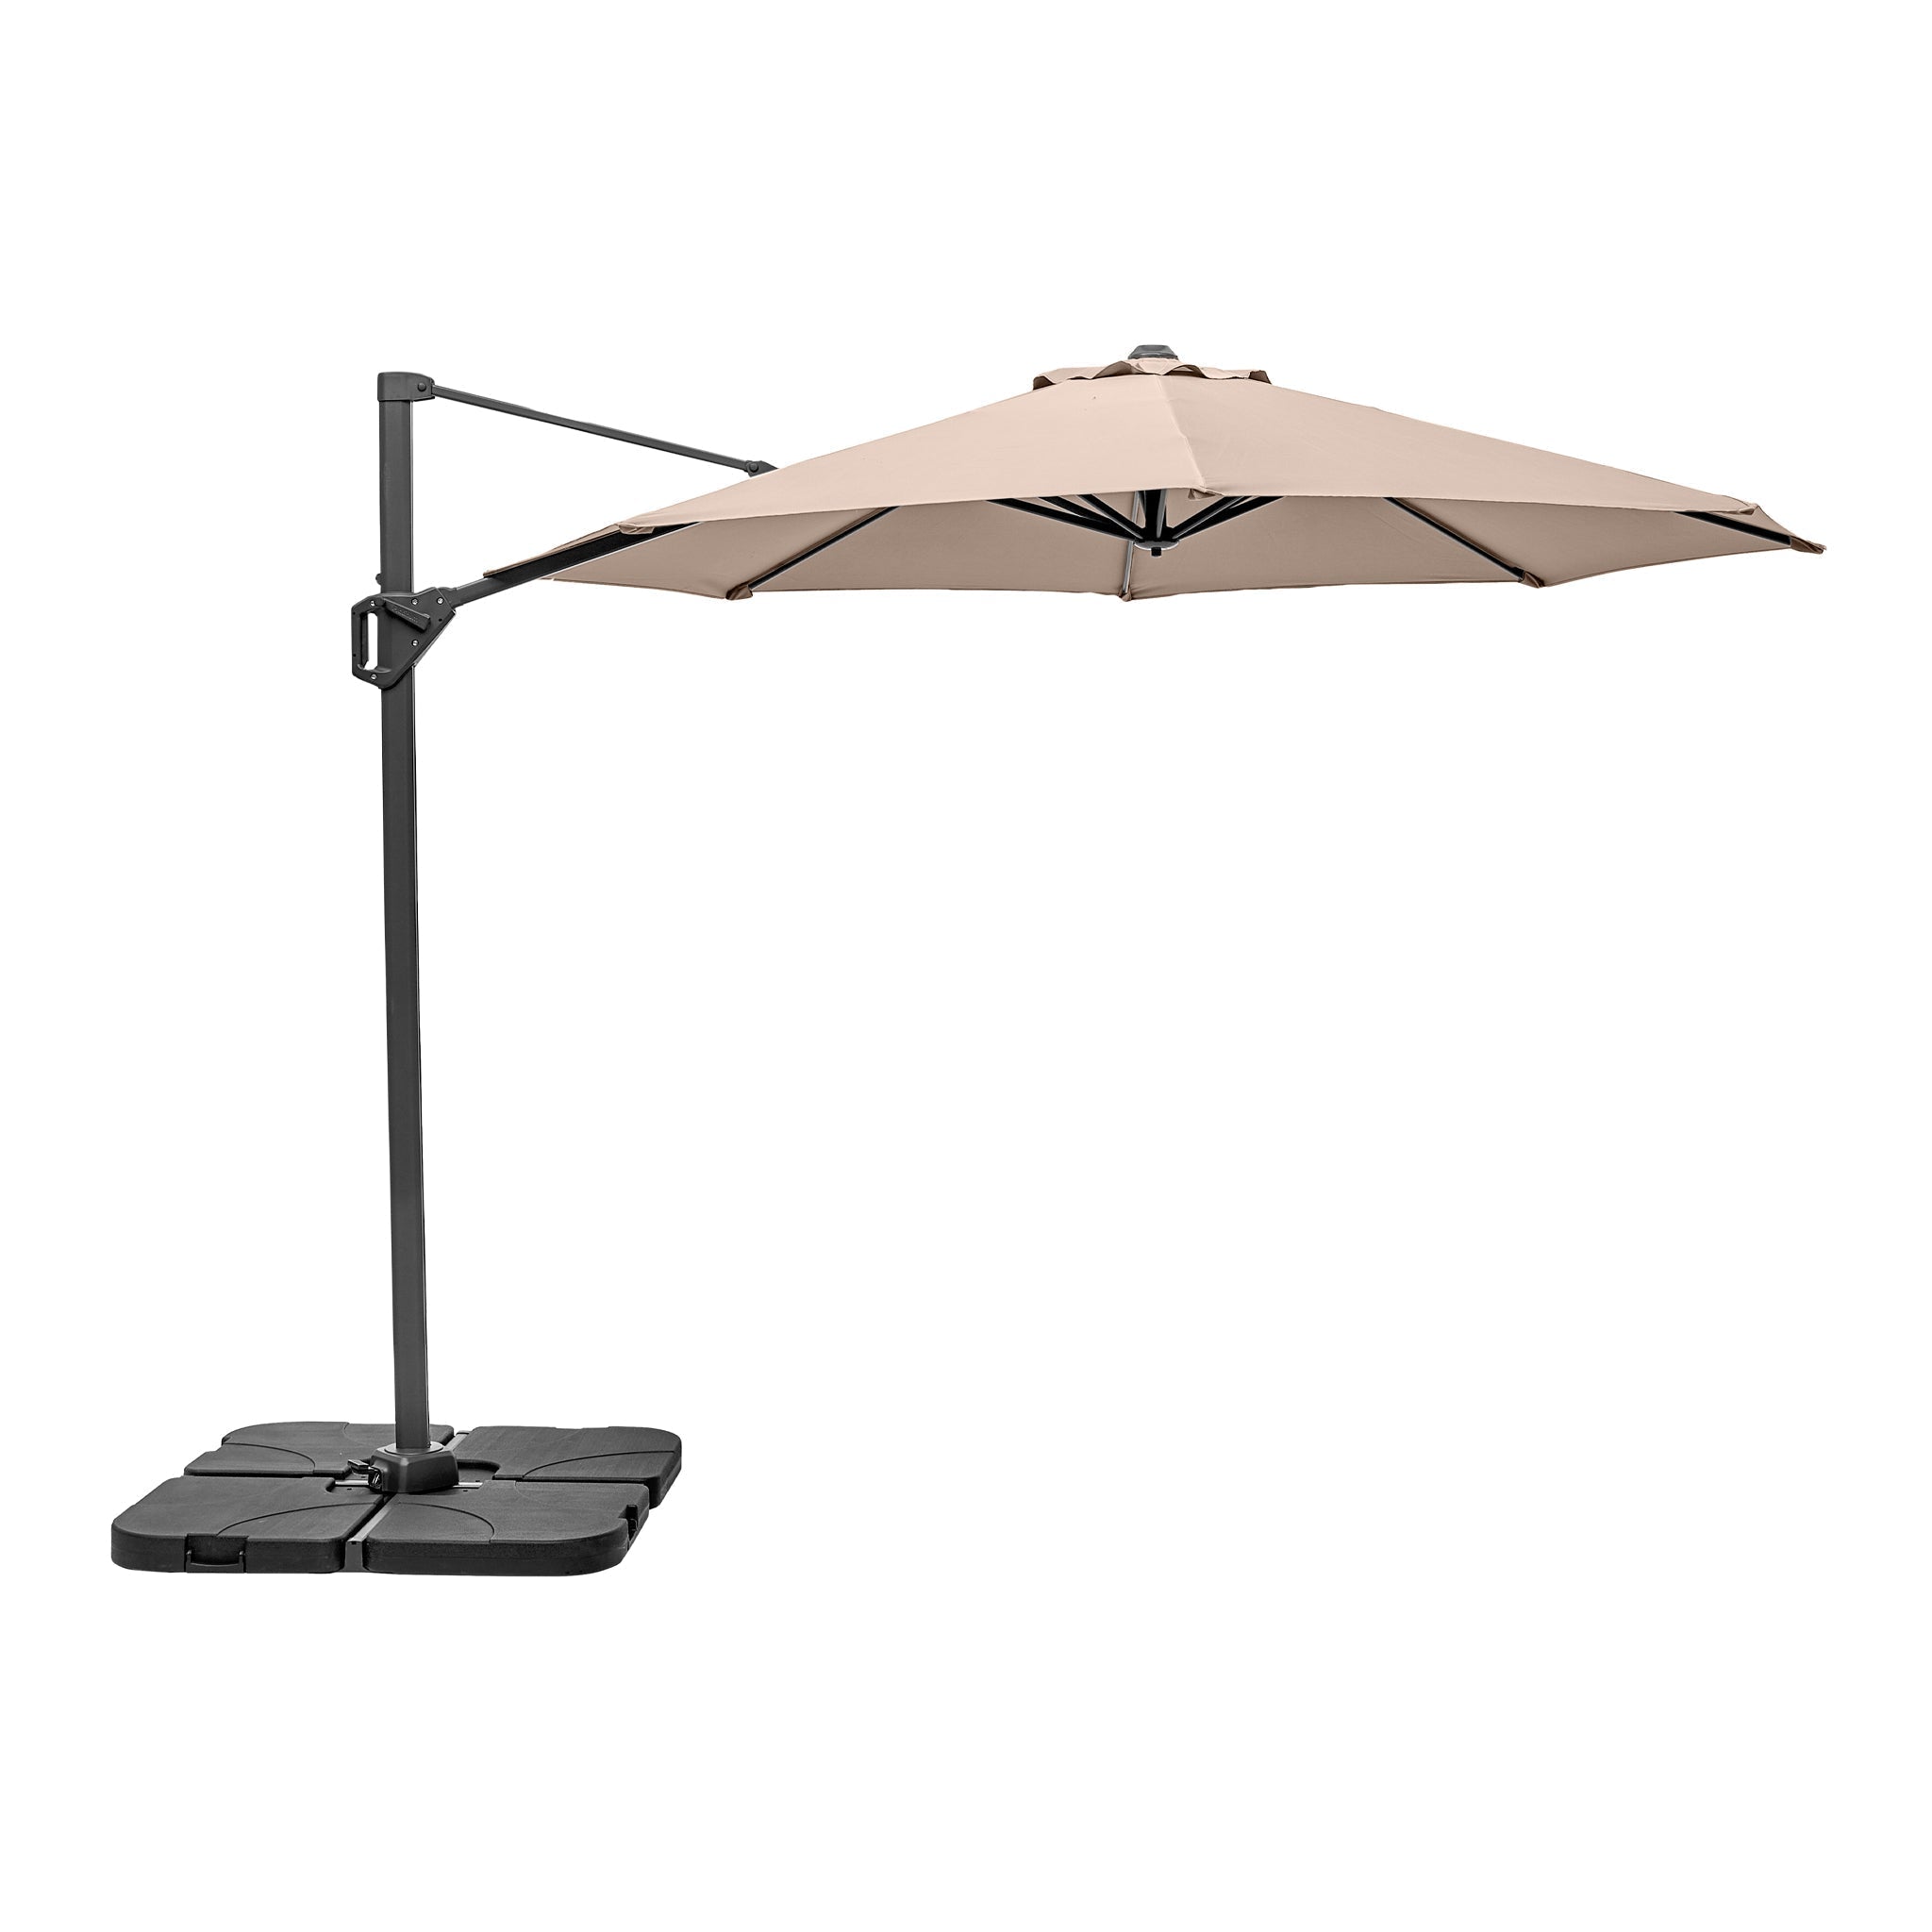 Voyager T1 3m Round Parasol in Taupe